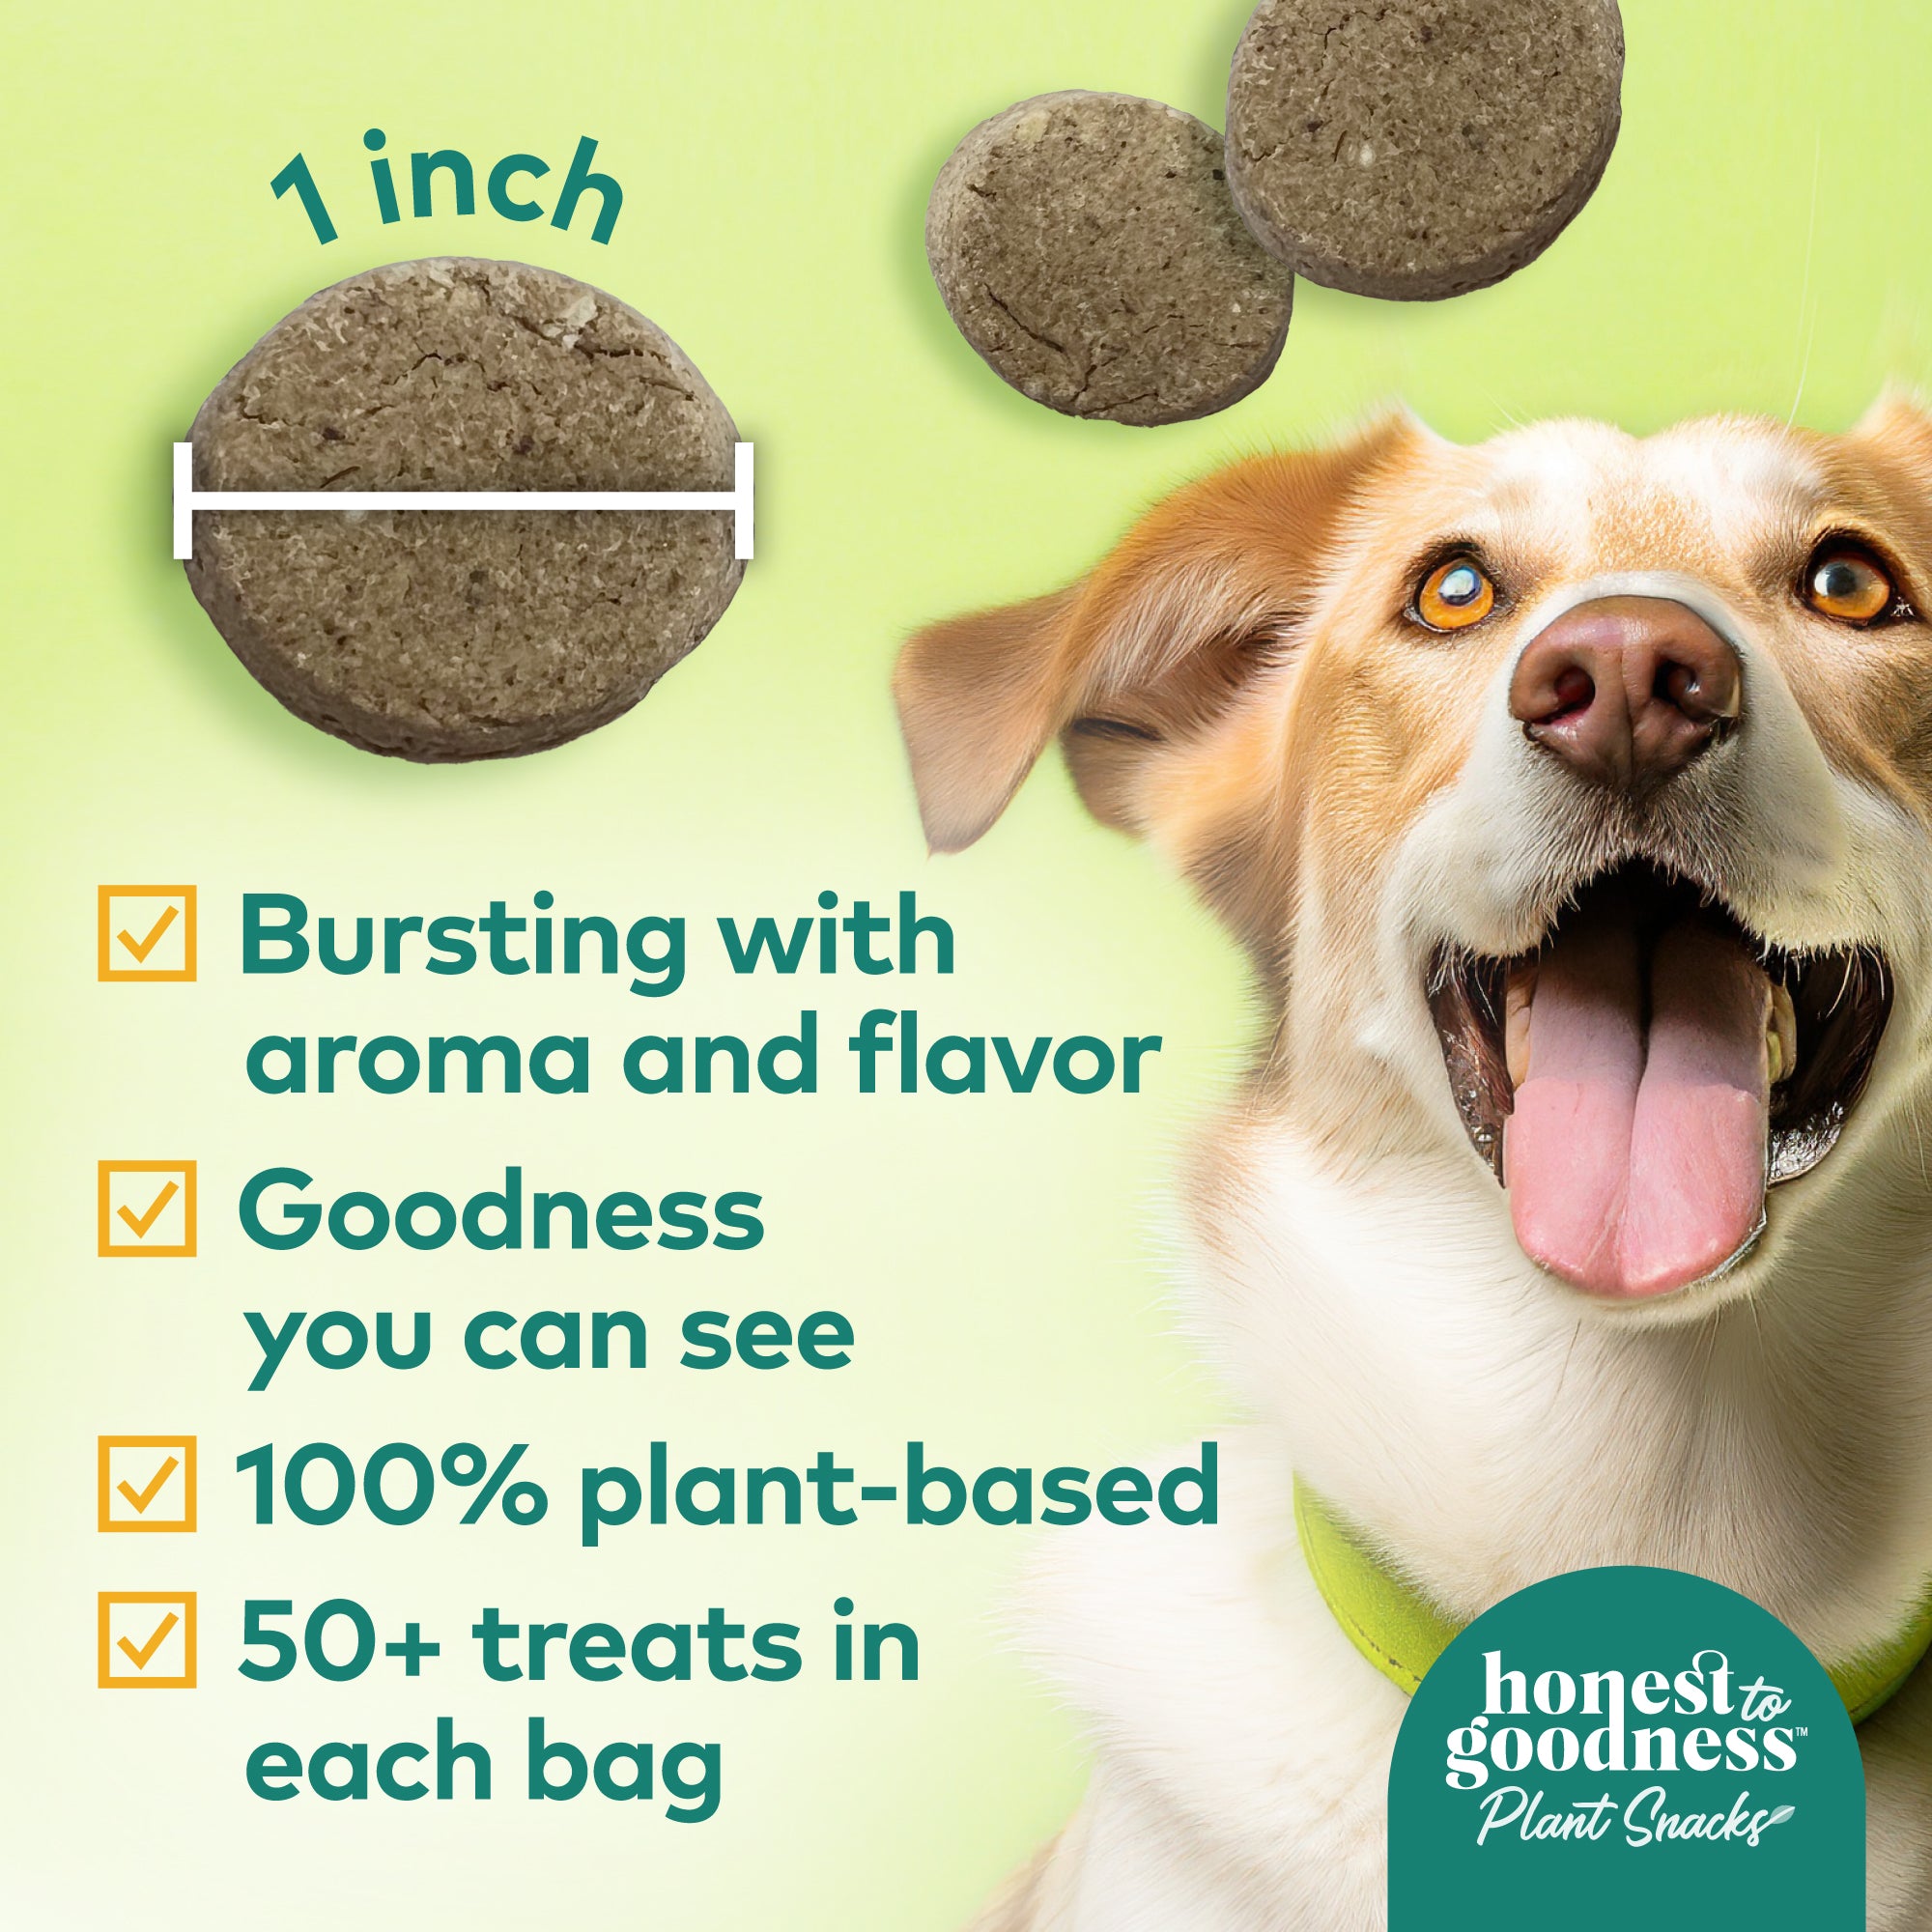 Honest to Goodness plant snacks are one inch in diameter, bursting with aroma and flavor. They have goodness you can see, are 100% plant-based, and have 50 plus treats in each 8 ounce bag.